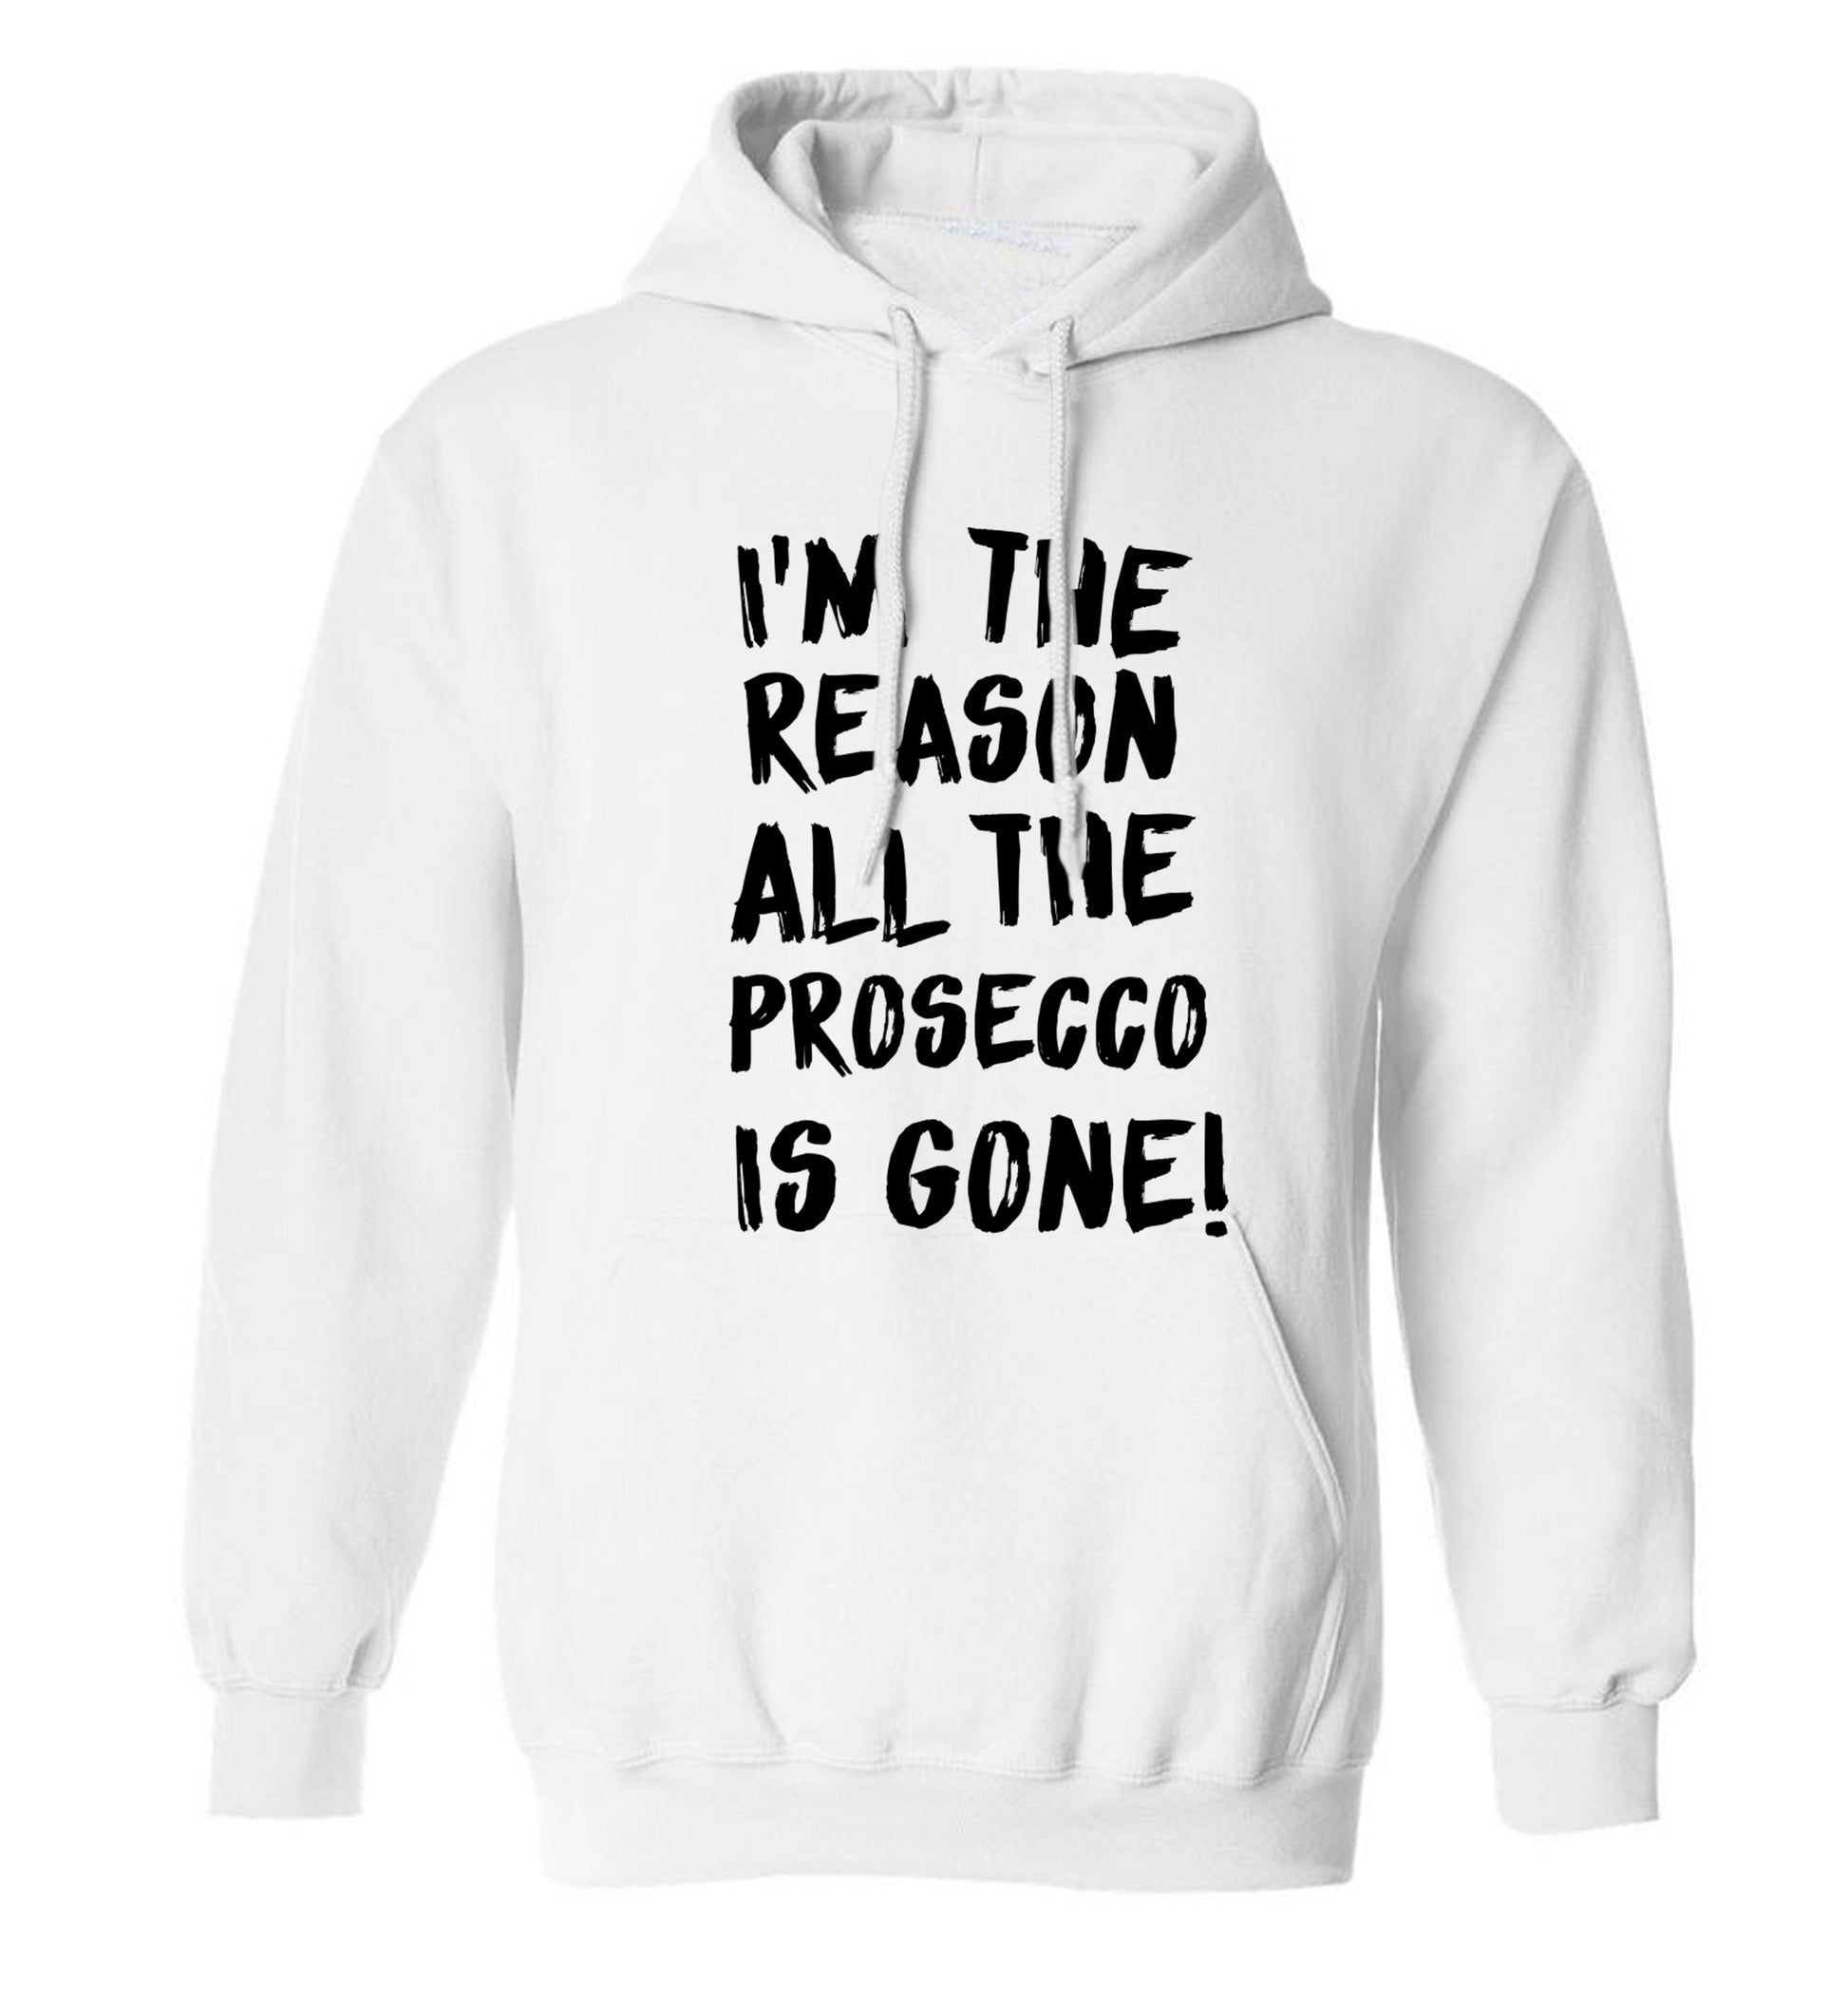 I'm the reason all the prosecco is gone adults unisex white hoodie 2XL